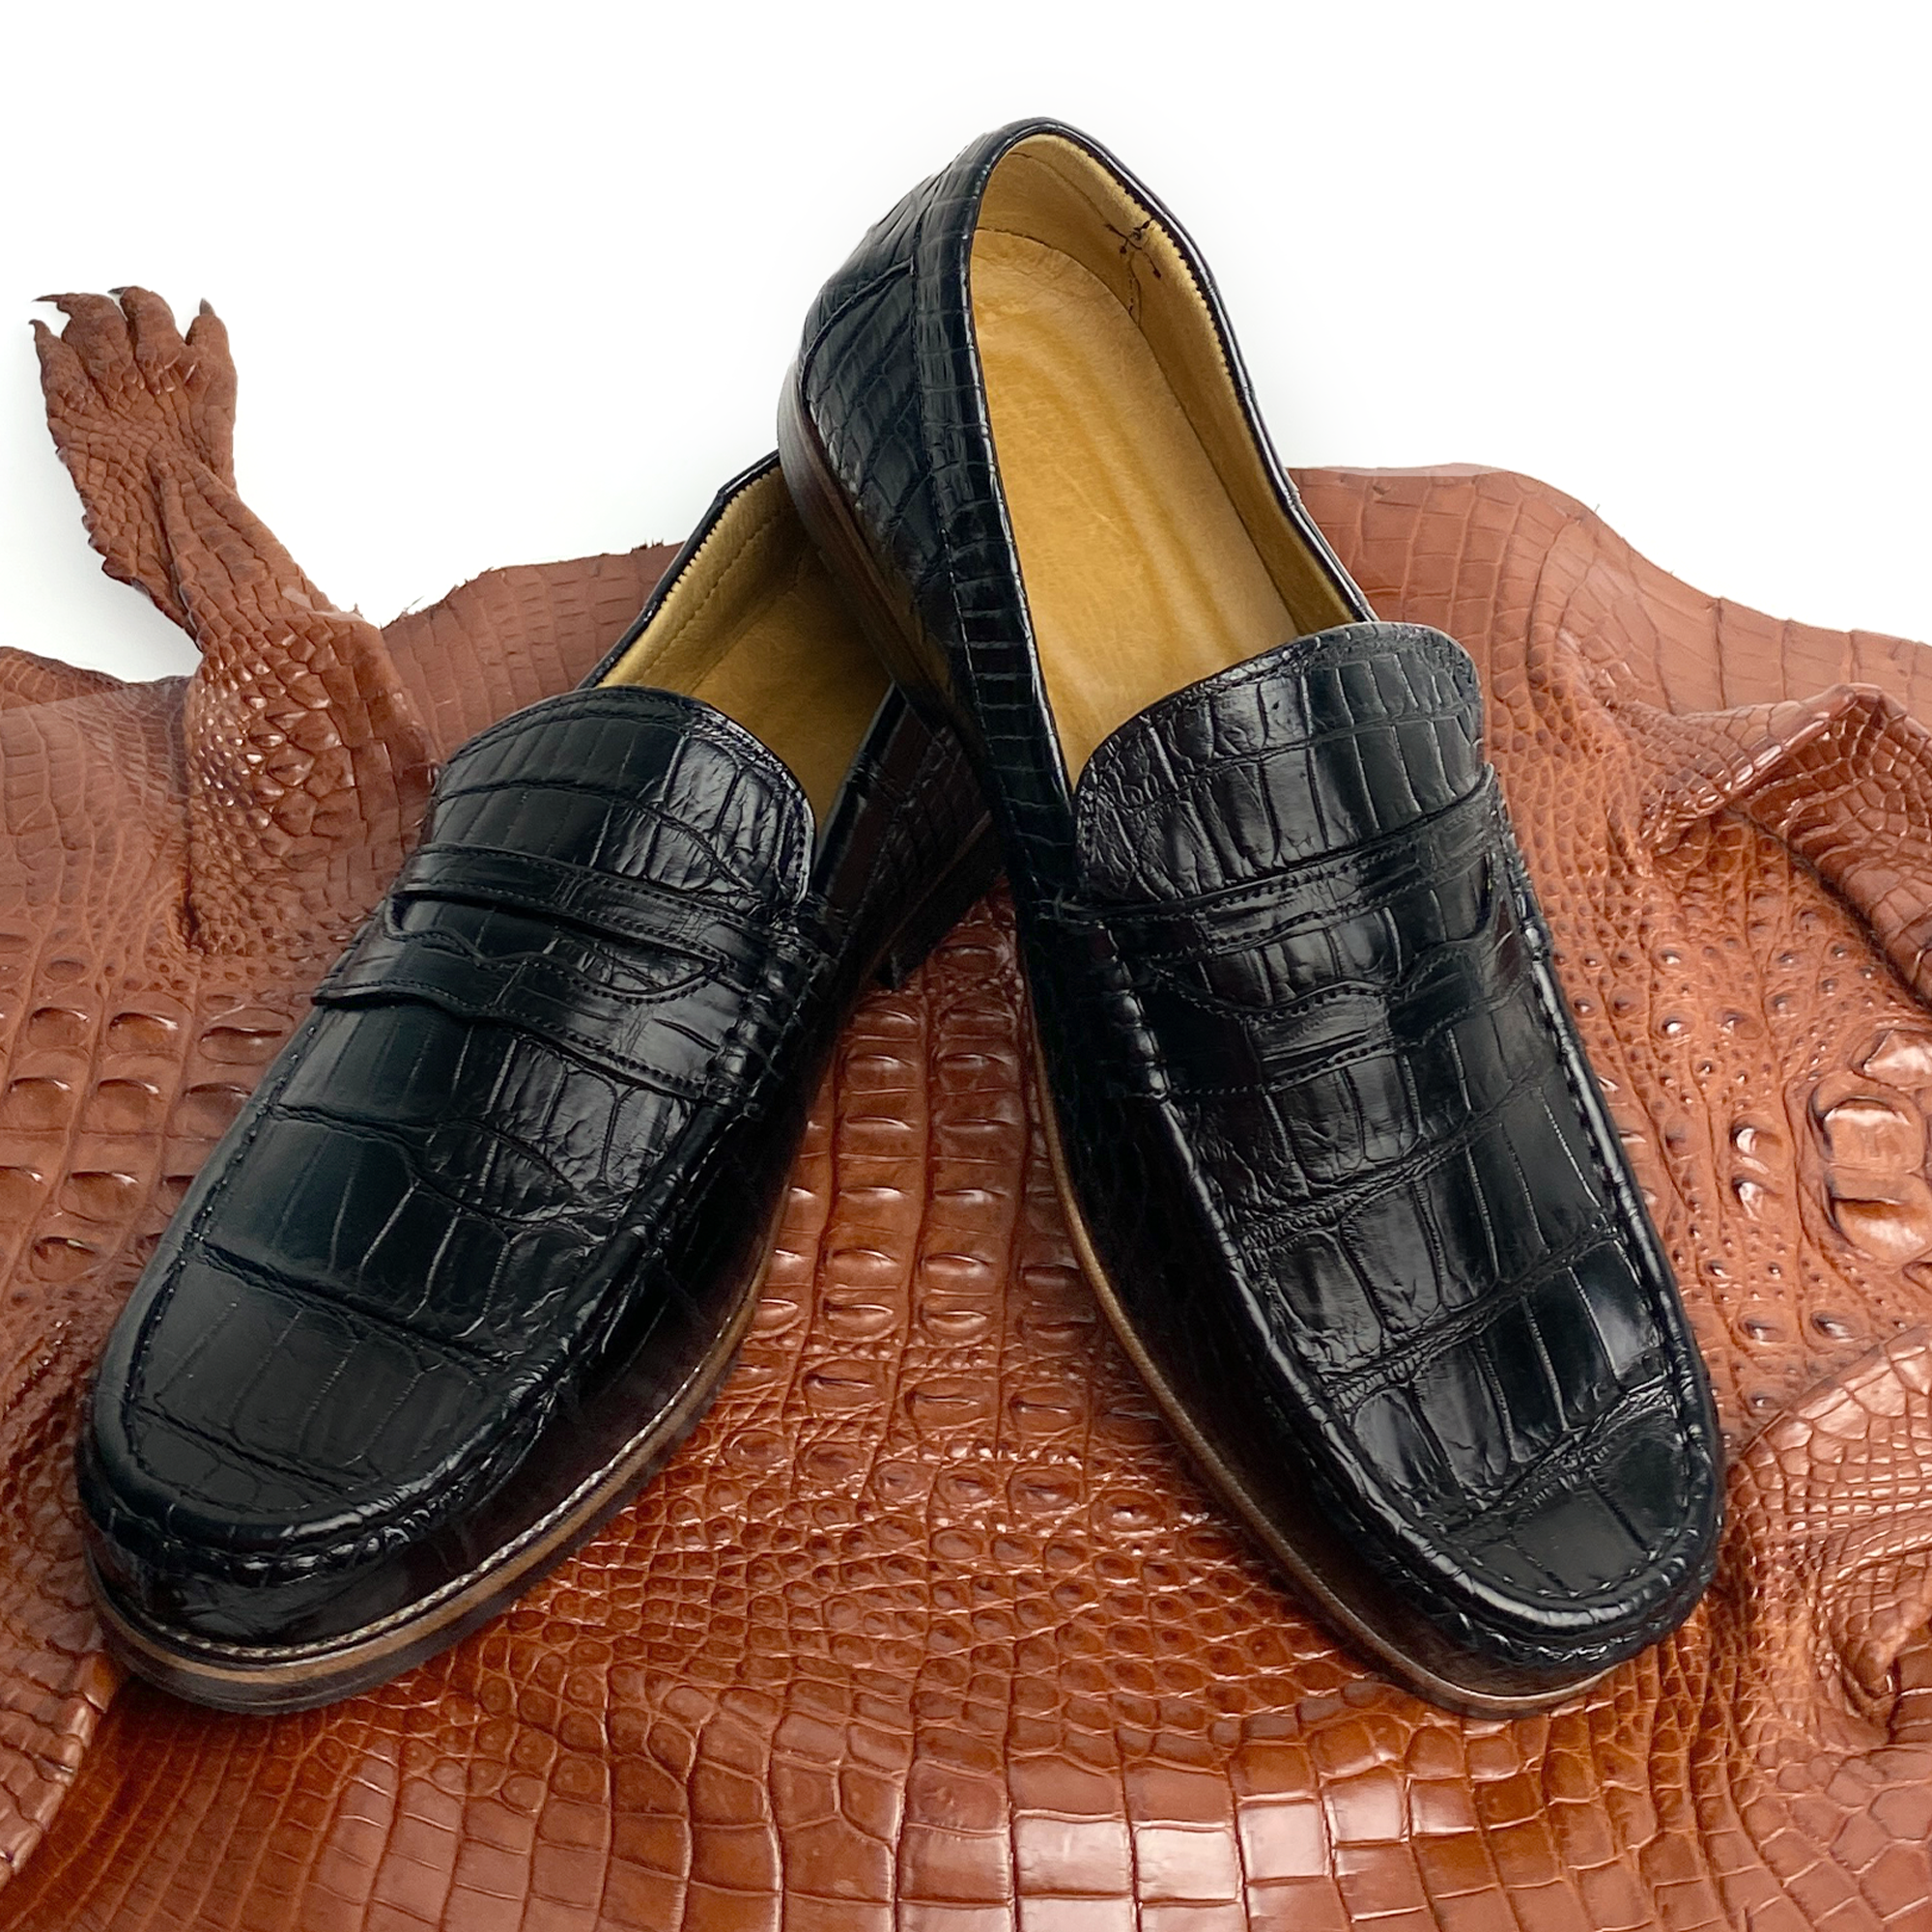 Black Alligator Leather Mens Penny Loafers | Crocodile Belly Skin Casual Loafer | SH41E42